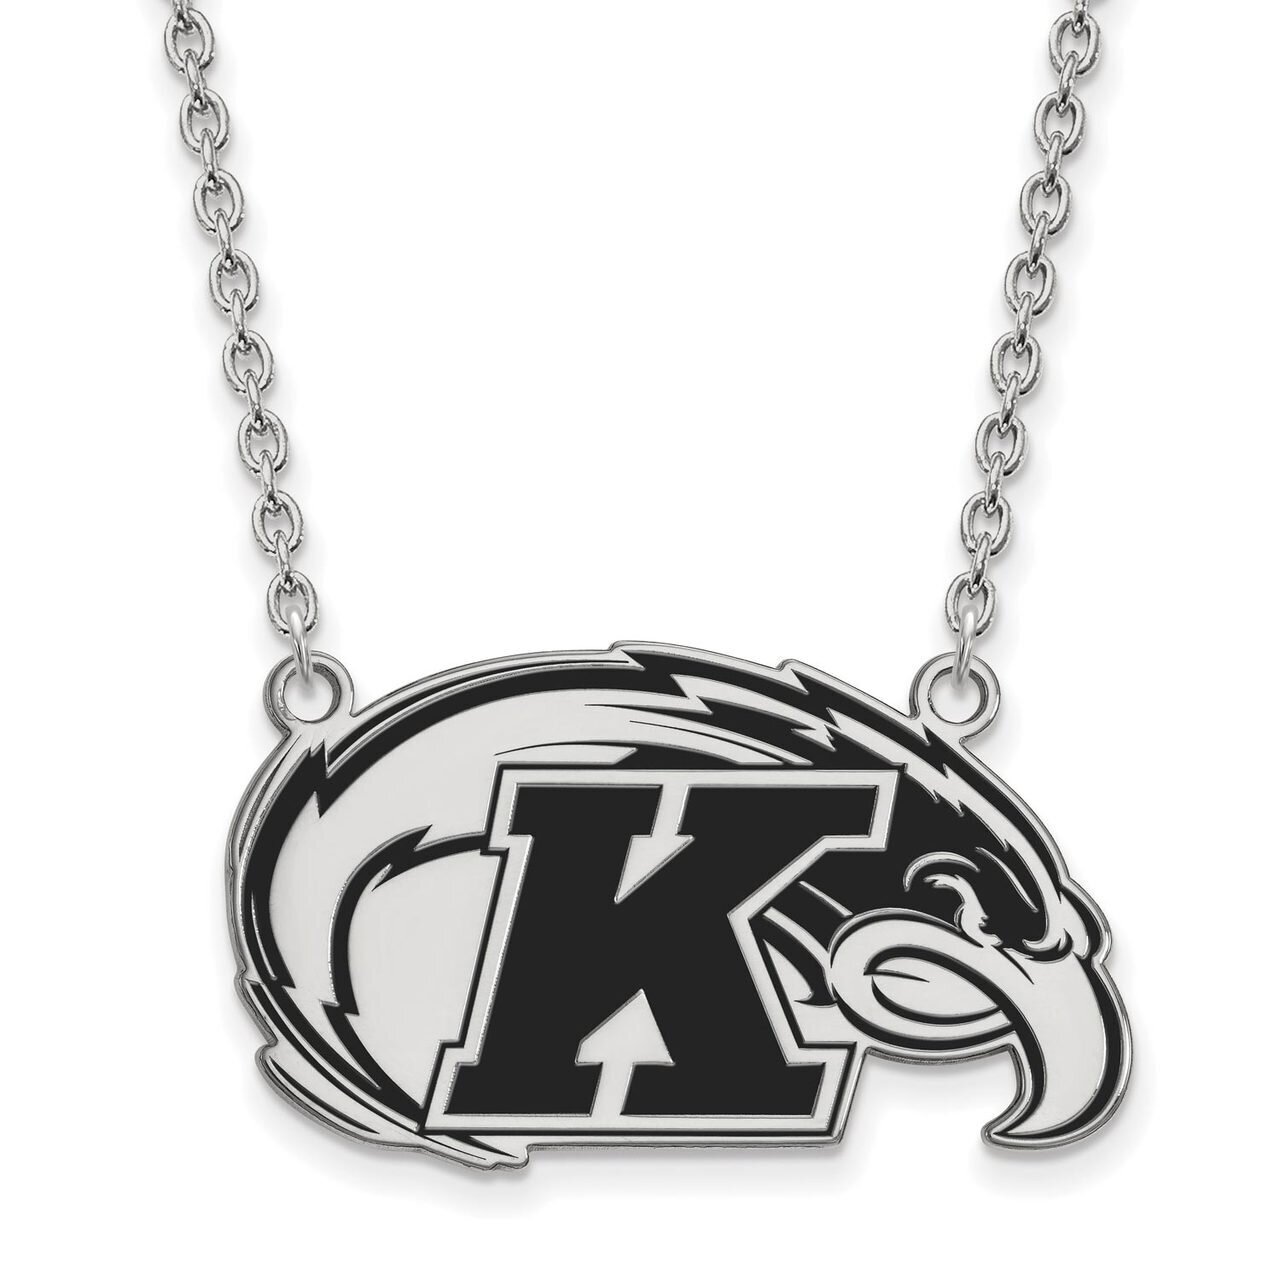 Kent State University Large Enamel Pendant with Chain Necklace Sterling Silver SS010KEN-18